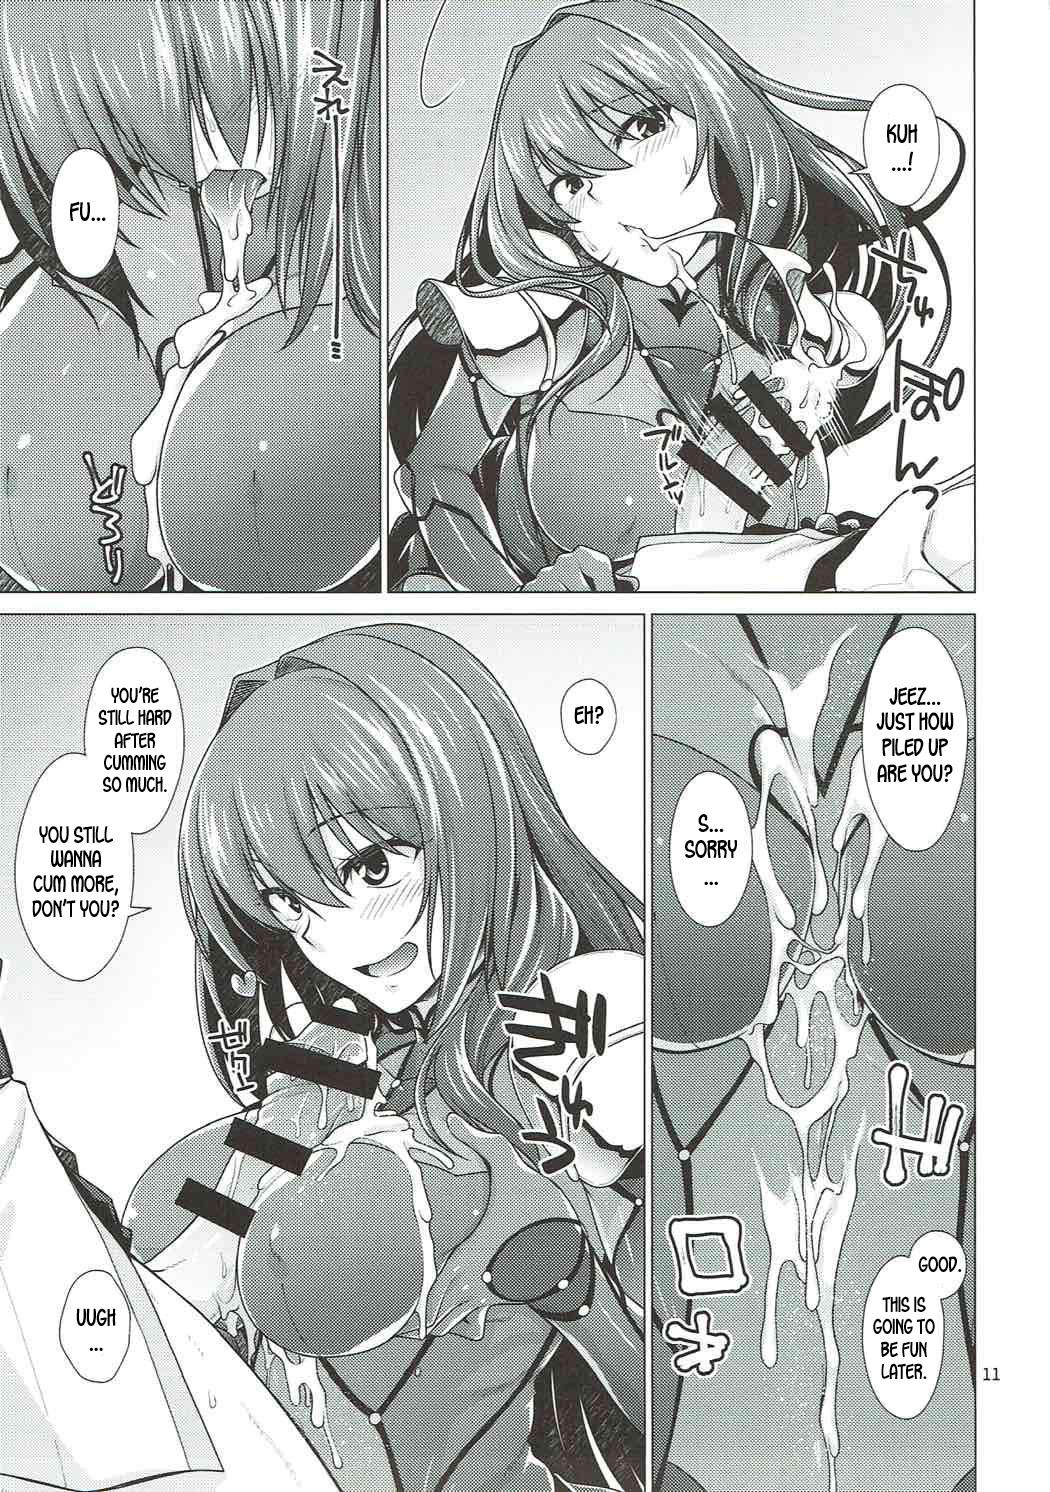 Mamando Scathach Shishou to Celt Shiki Gachihamex! - Fate grand order Hairy Pussy - Page 10